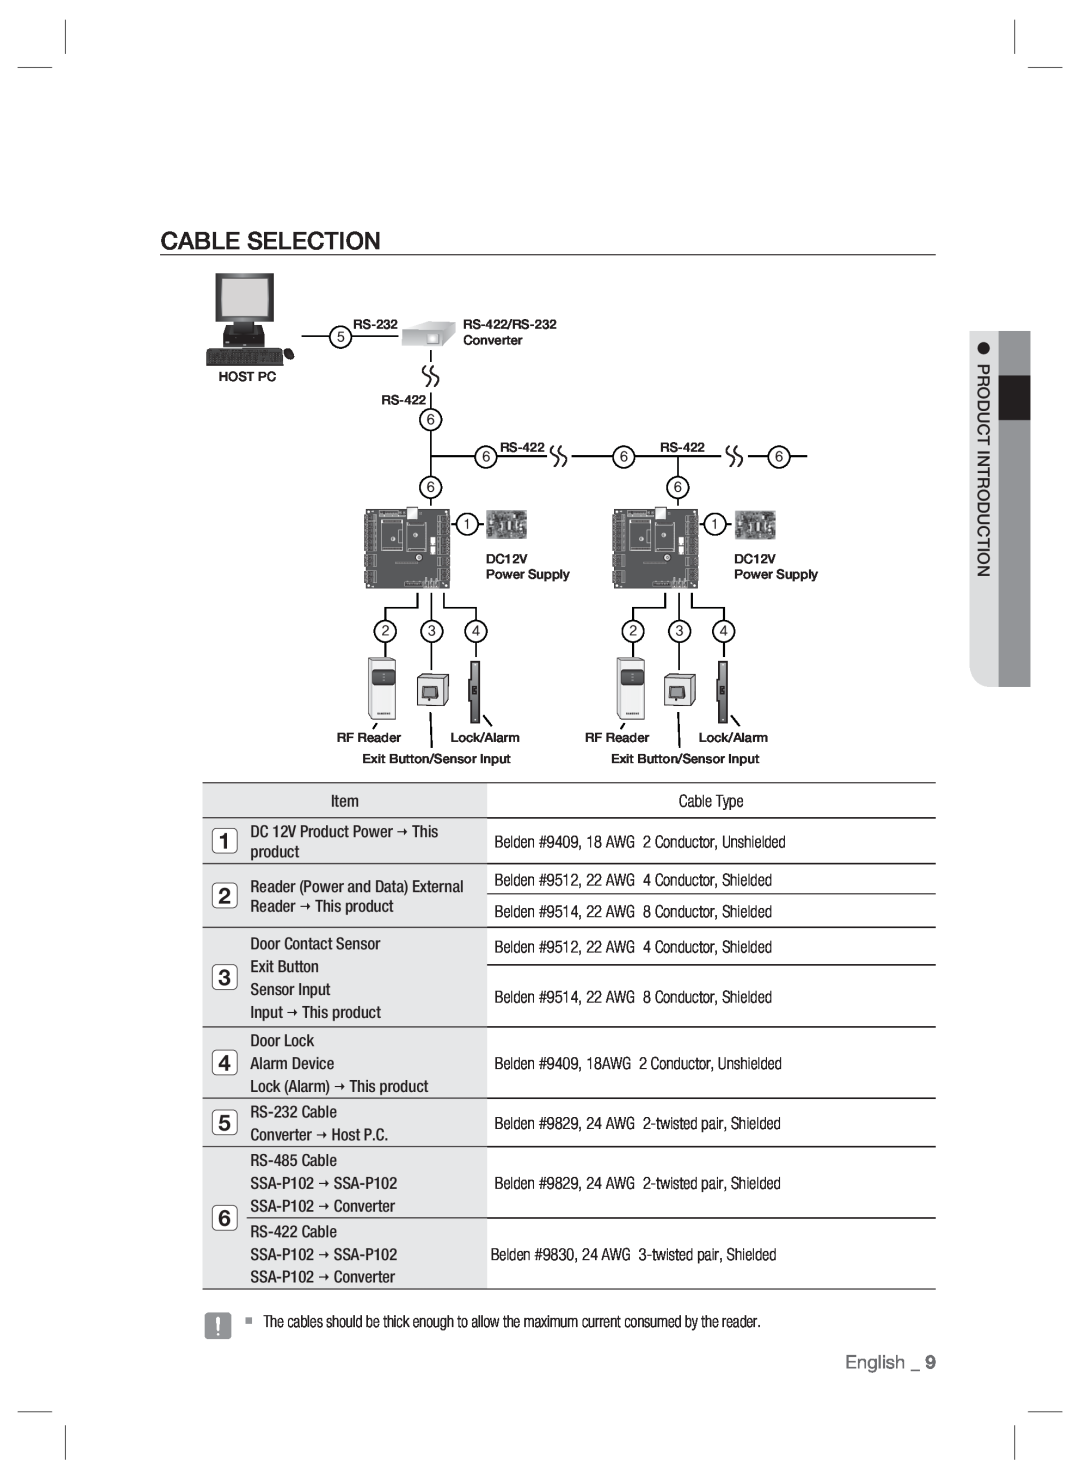 Samsung SSA-P102T user manual Cable Selection, English 